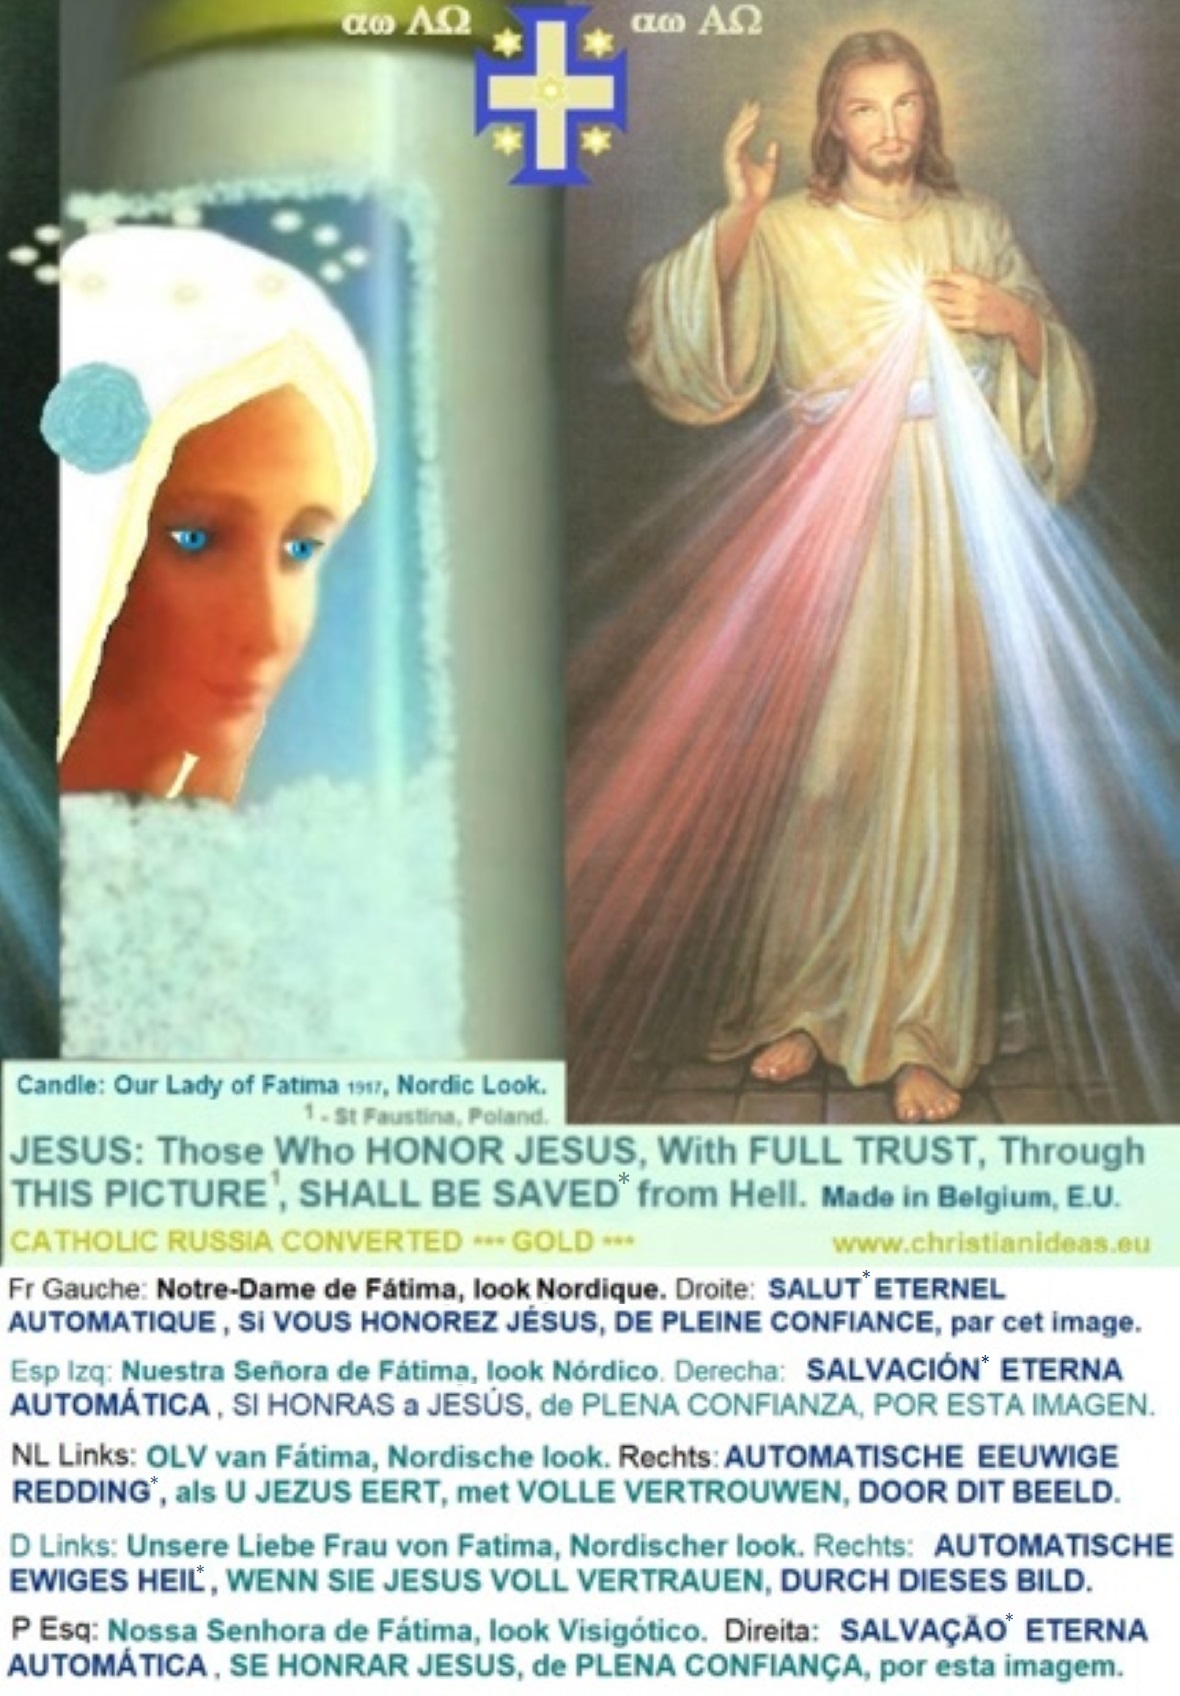 Left: Our Lady of the Roses Honored Exposed and Death doesn't enter inside.

Our Lady of Fatima was very very Beautiful in 1917.
(Estethic care: To have heart for the people.)

Right: THOSE WHO HONOR JESUS WITH FULL TRUST THROUGH THIS PICTURE, SHALL BE SAVED.